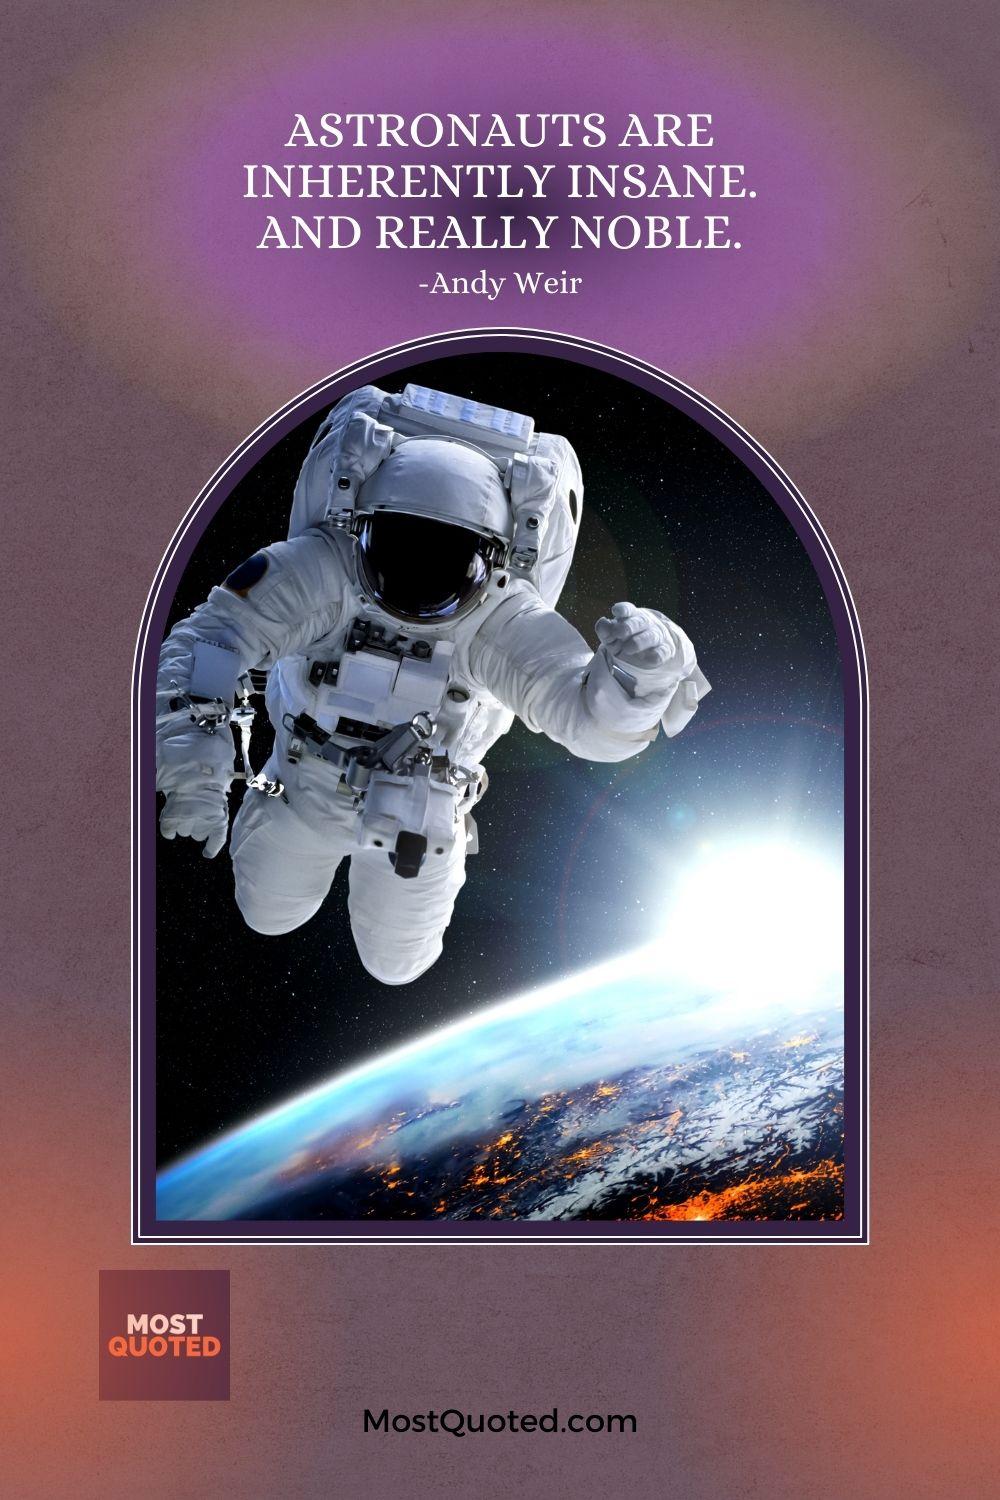 Astronauts are inherently insane. And really noble. - Andy Weir